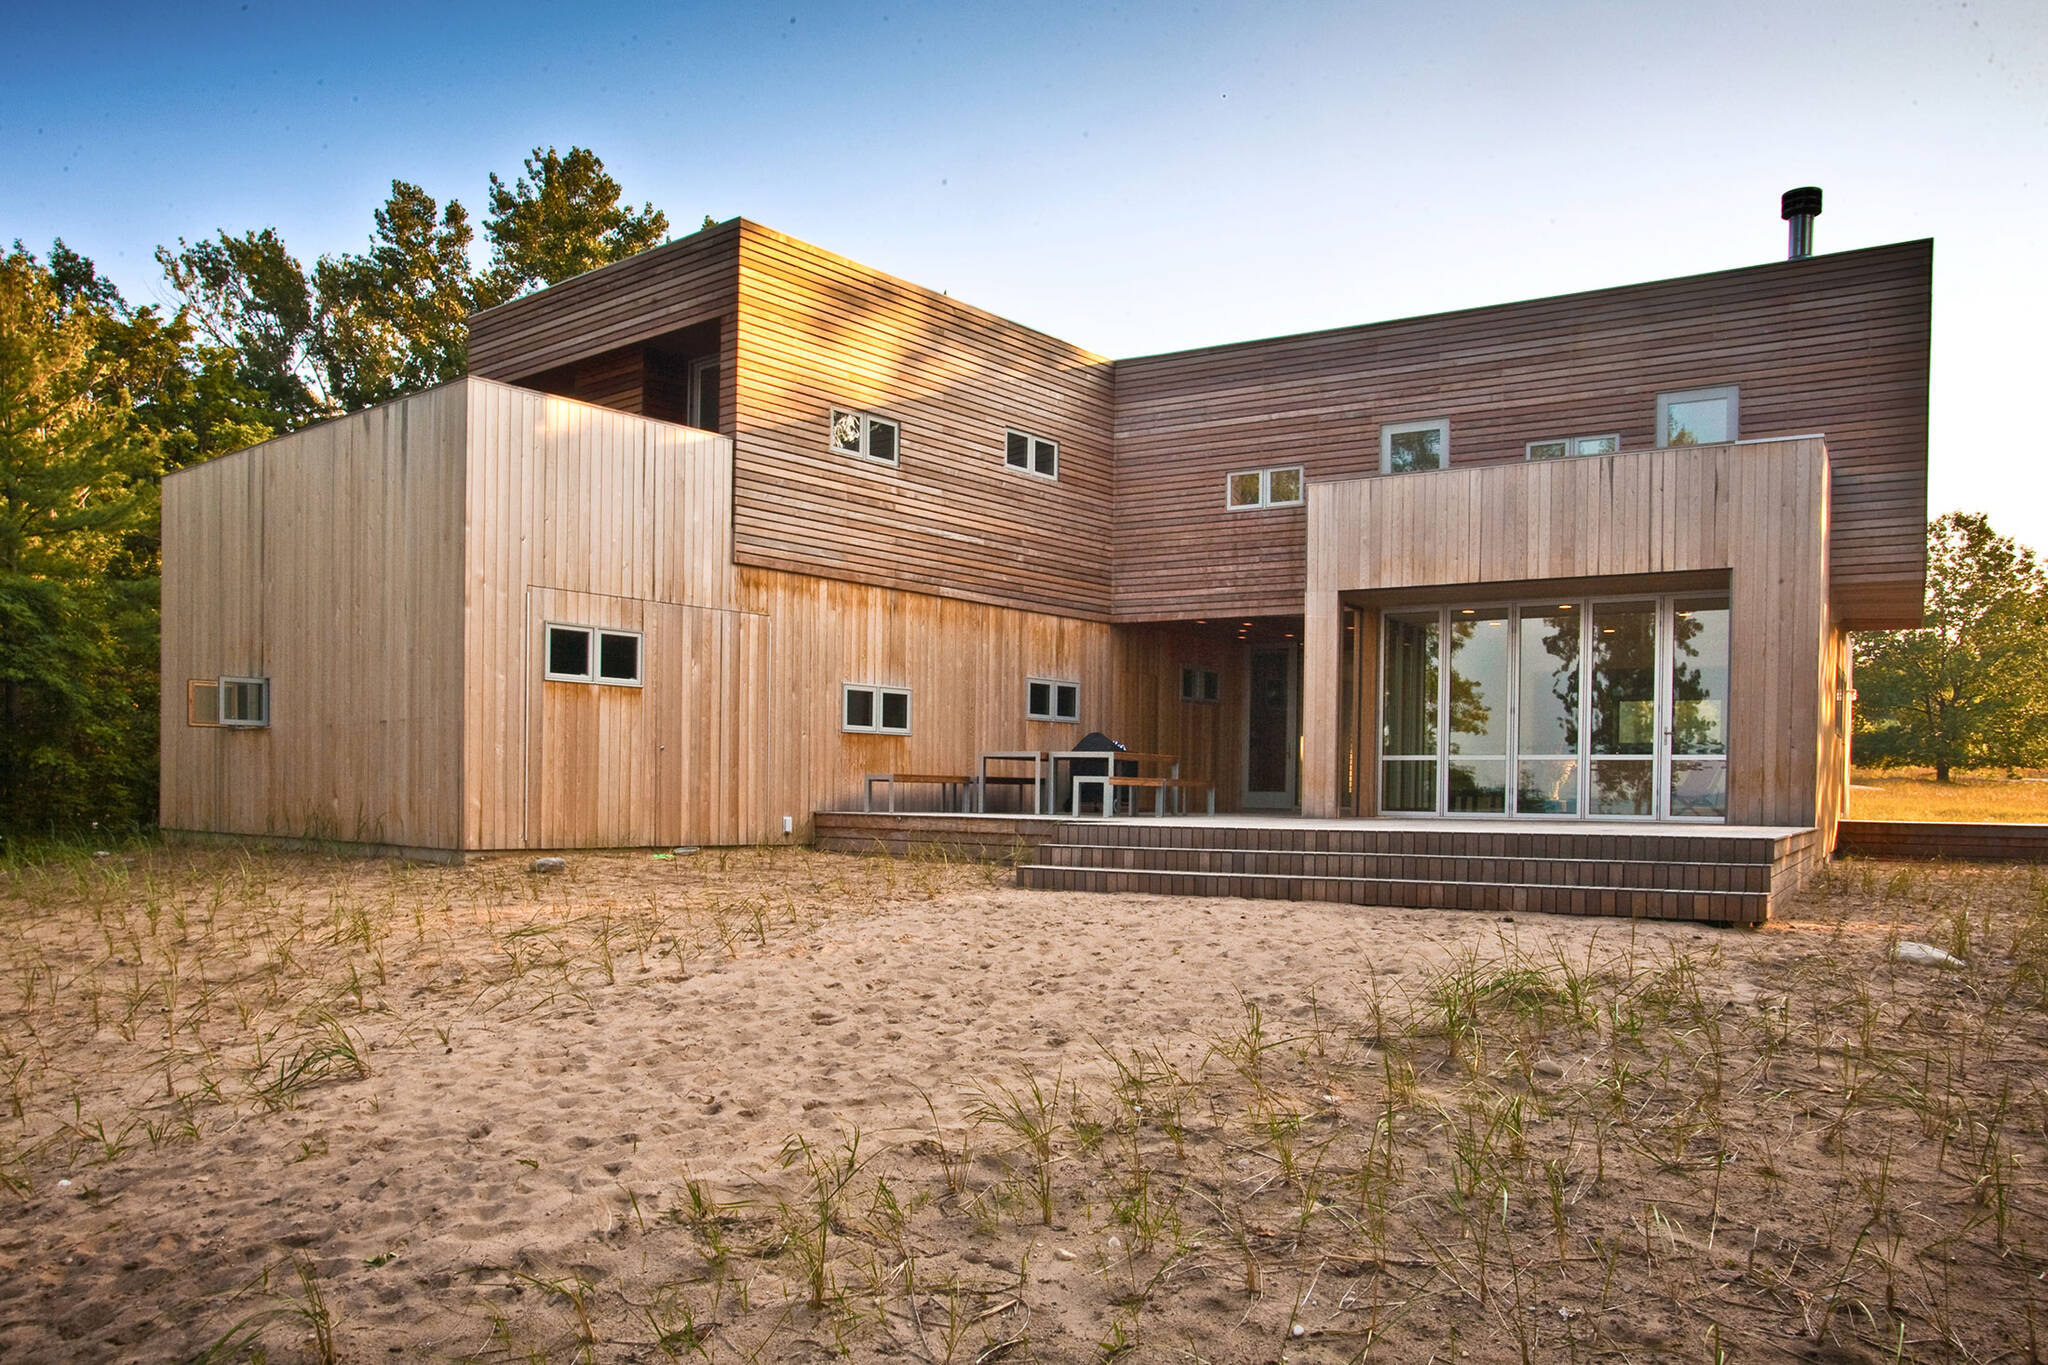 Wooden cladding facade of the sustainable lake house project in Omena, Michigan designed by the architecture studio Danny Forster & Architecture